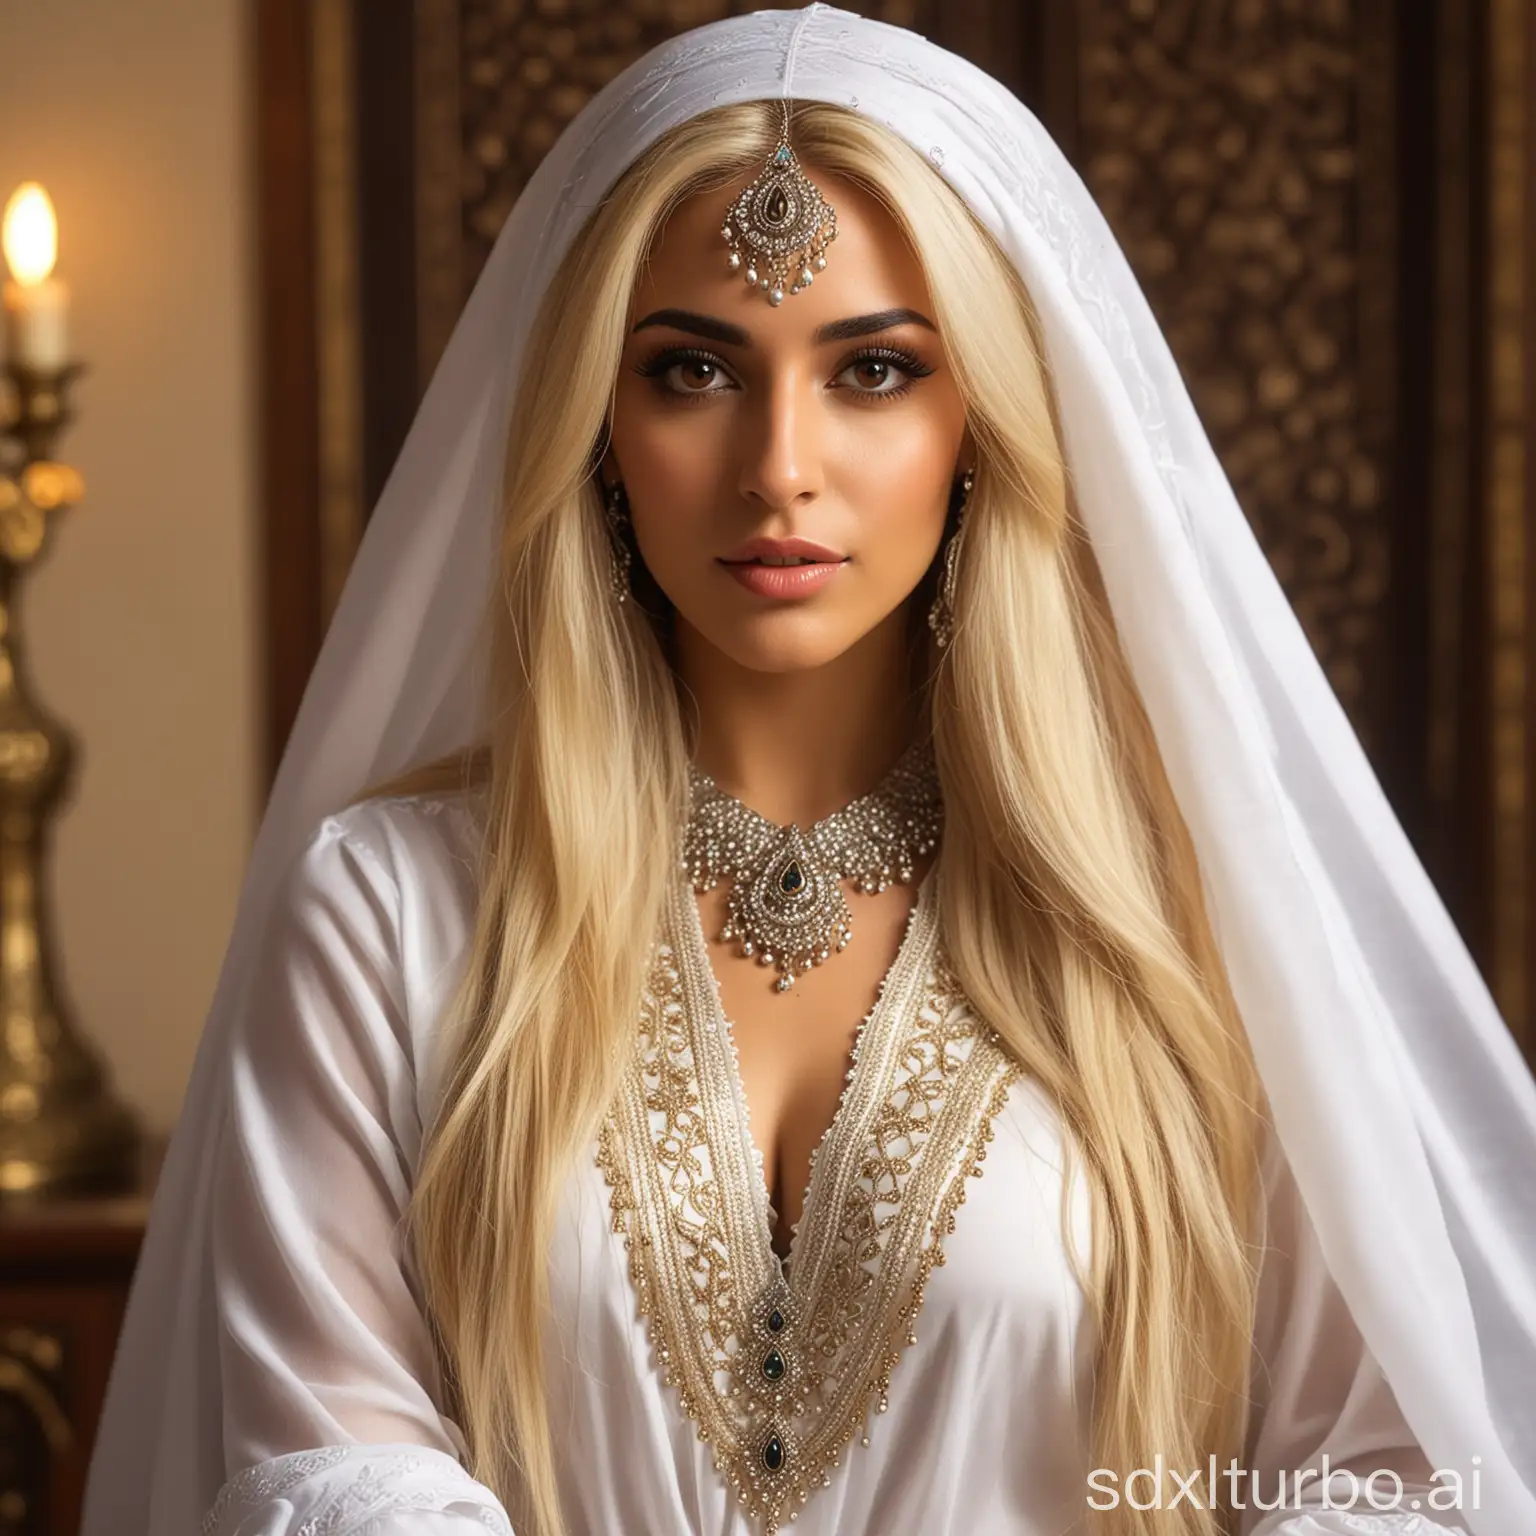 Ethereal-Arabian-Sorceress-with-Timeless-Charisma